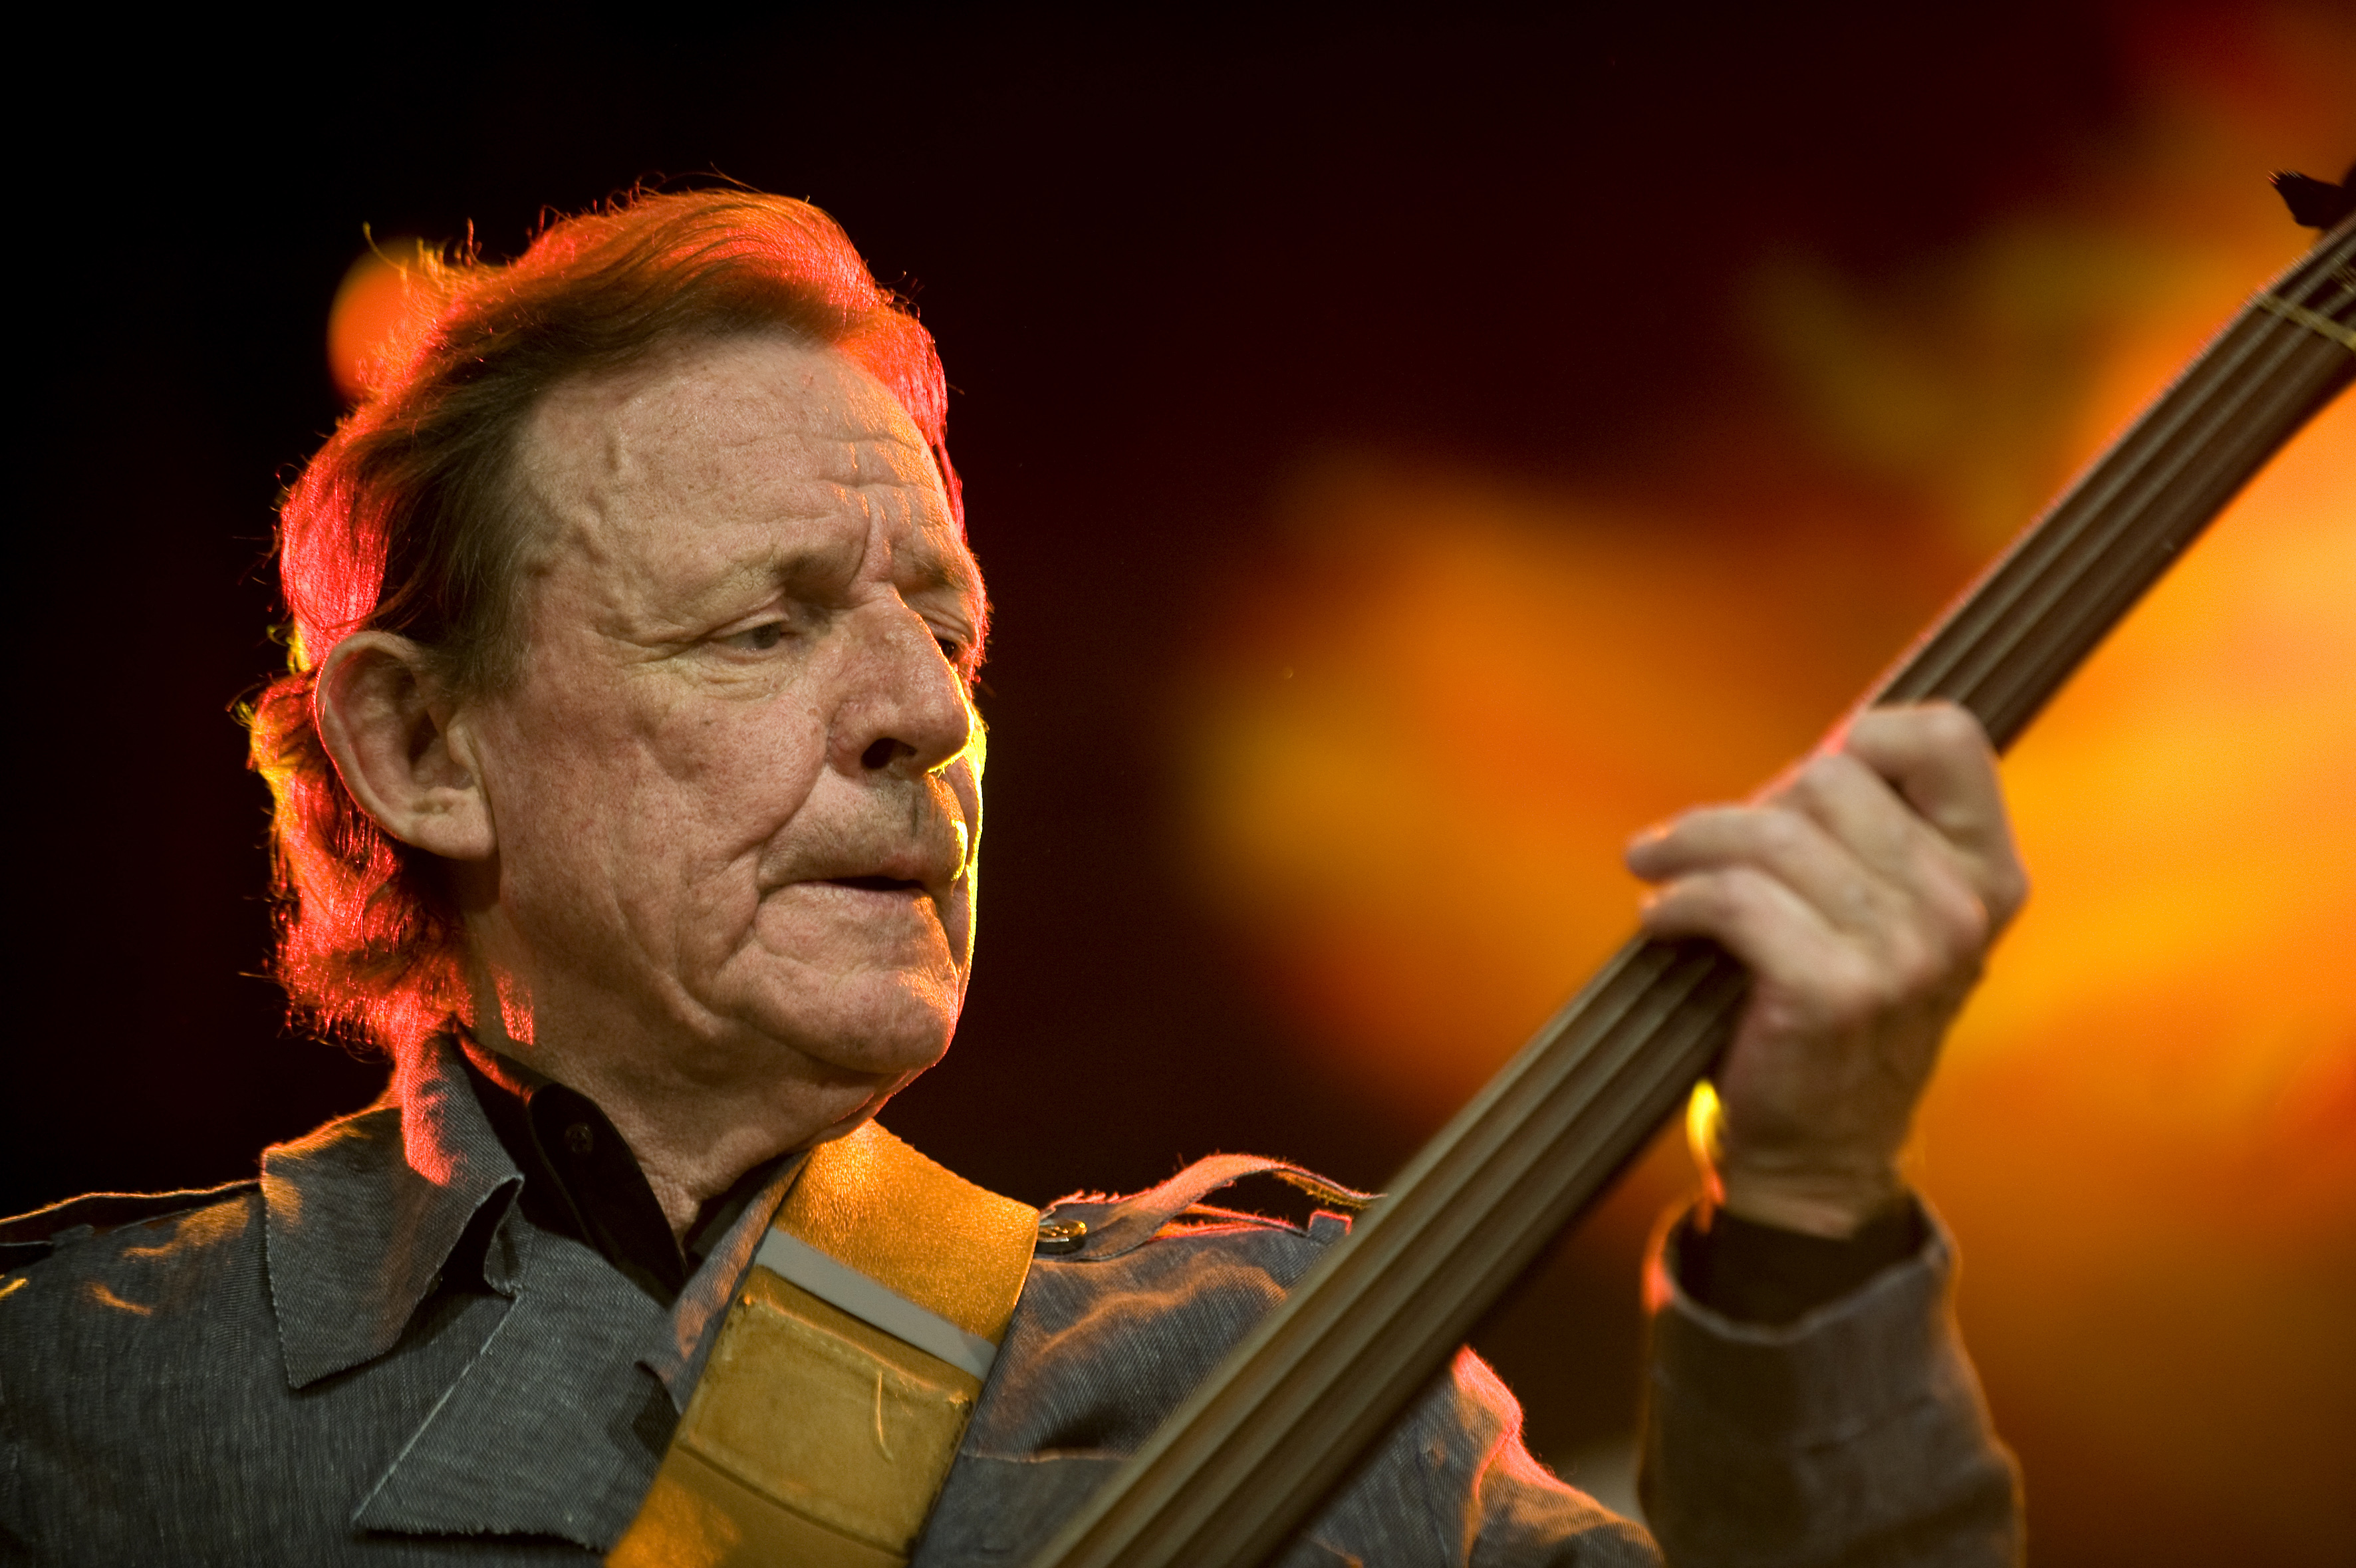 Jack Bruce performs on stage during North Sea Jazz Festival at Ahoy on July 6, 2012 in Rotterdam, Netherlands. (Rob Verhorst&amp;mdash;Redferns via Getty Images)